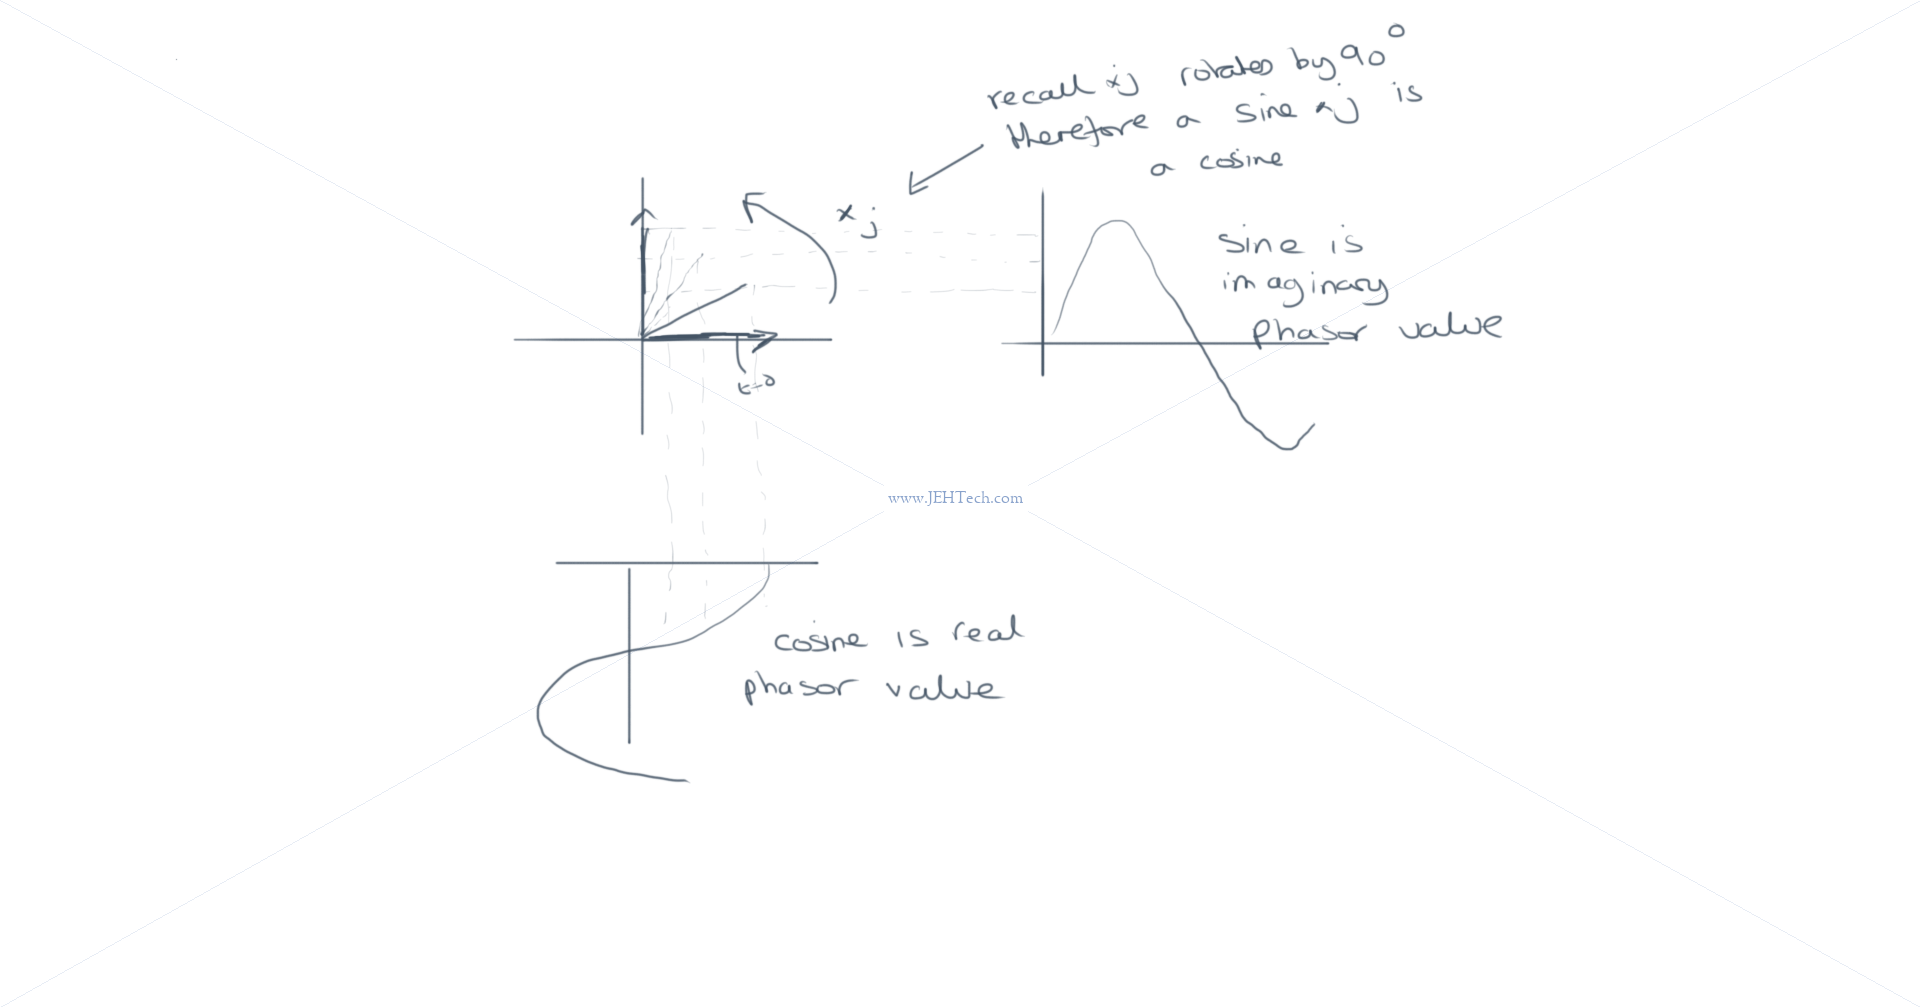 sine and cosine can be seen as the values of a phasor on the imaginary and real axes 